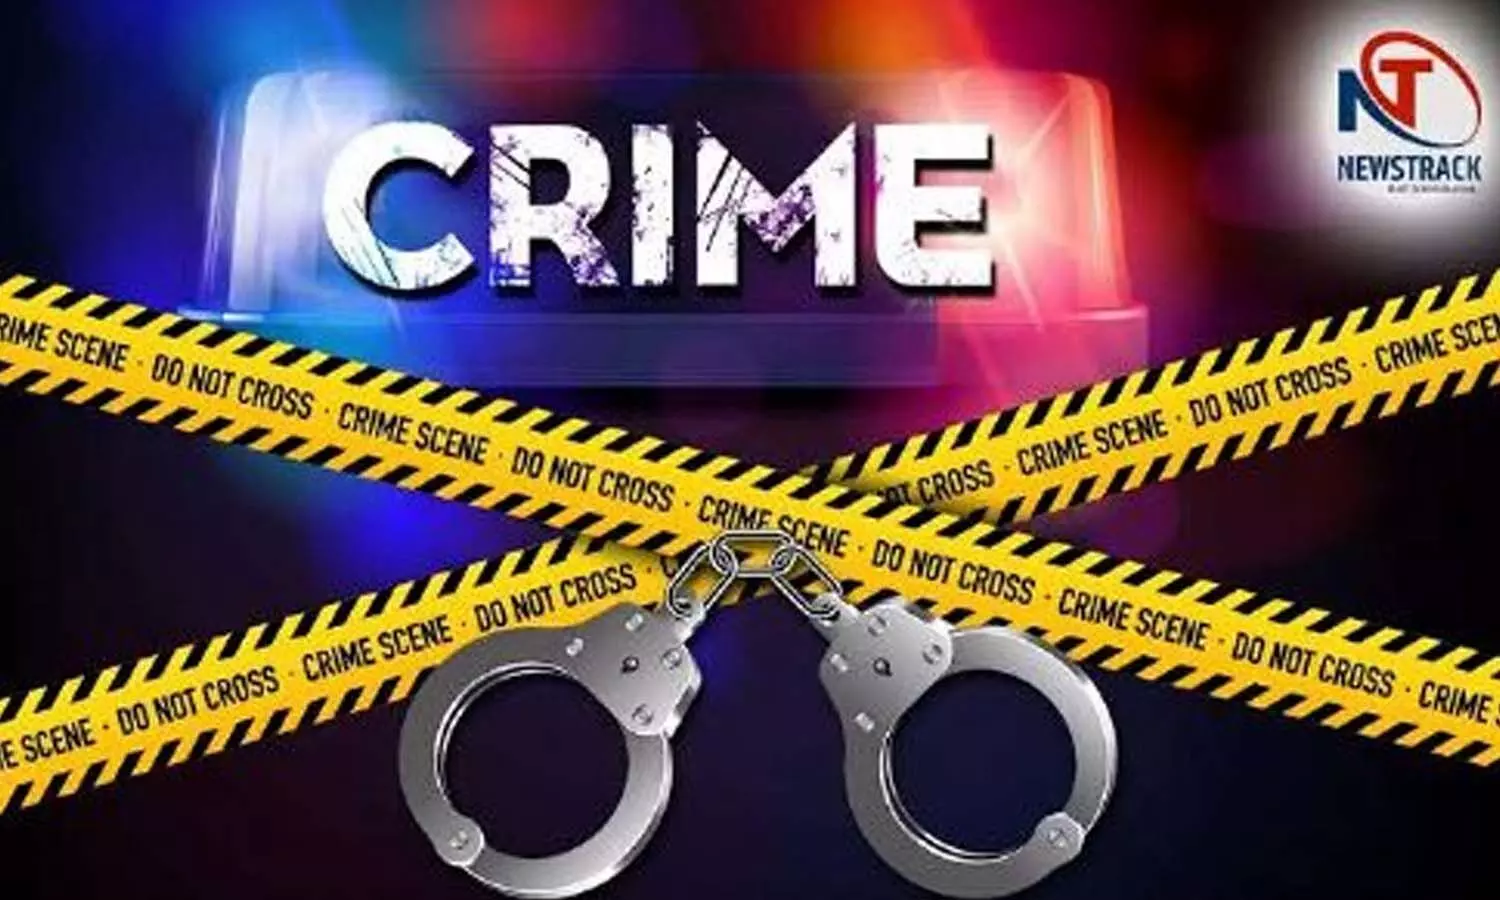 Chandauli district, the police arrested three people, including the kingpin of the fraudsters who defrauded the government of revenue through codified documents and sent them to jail.